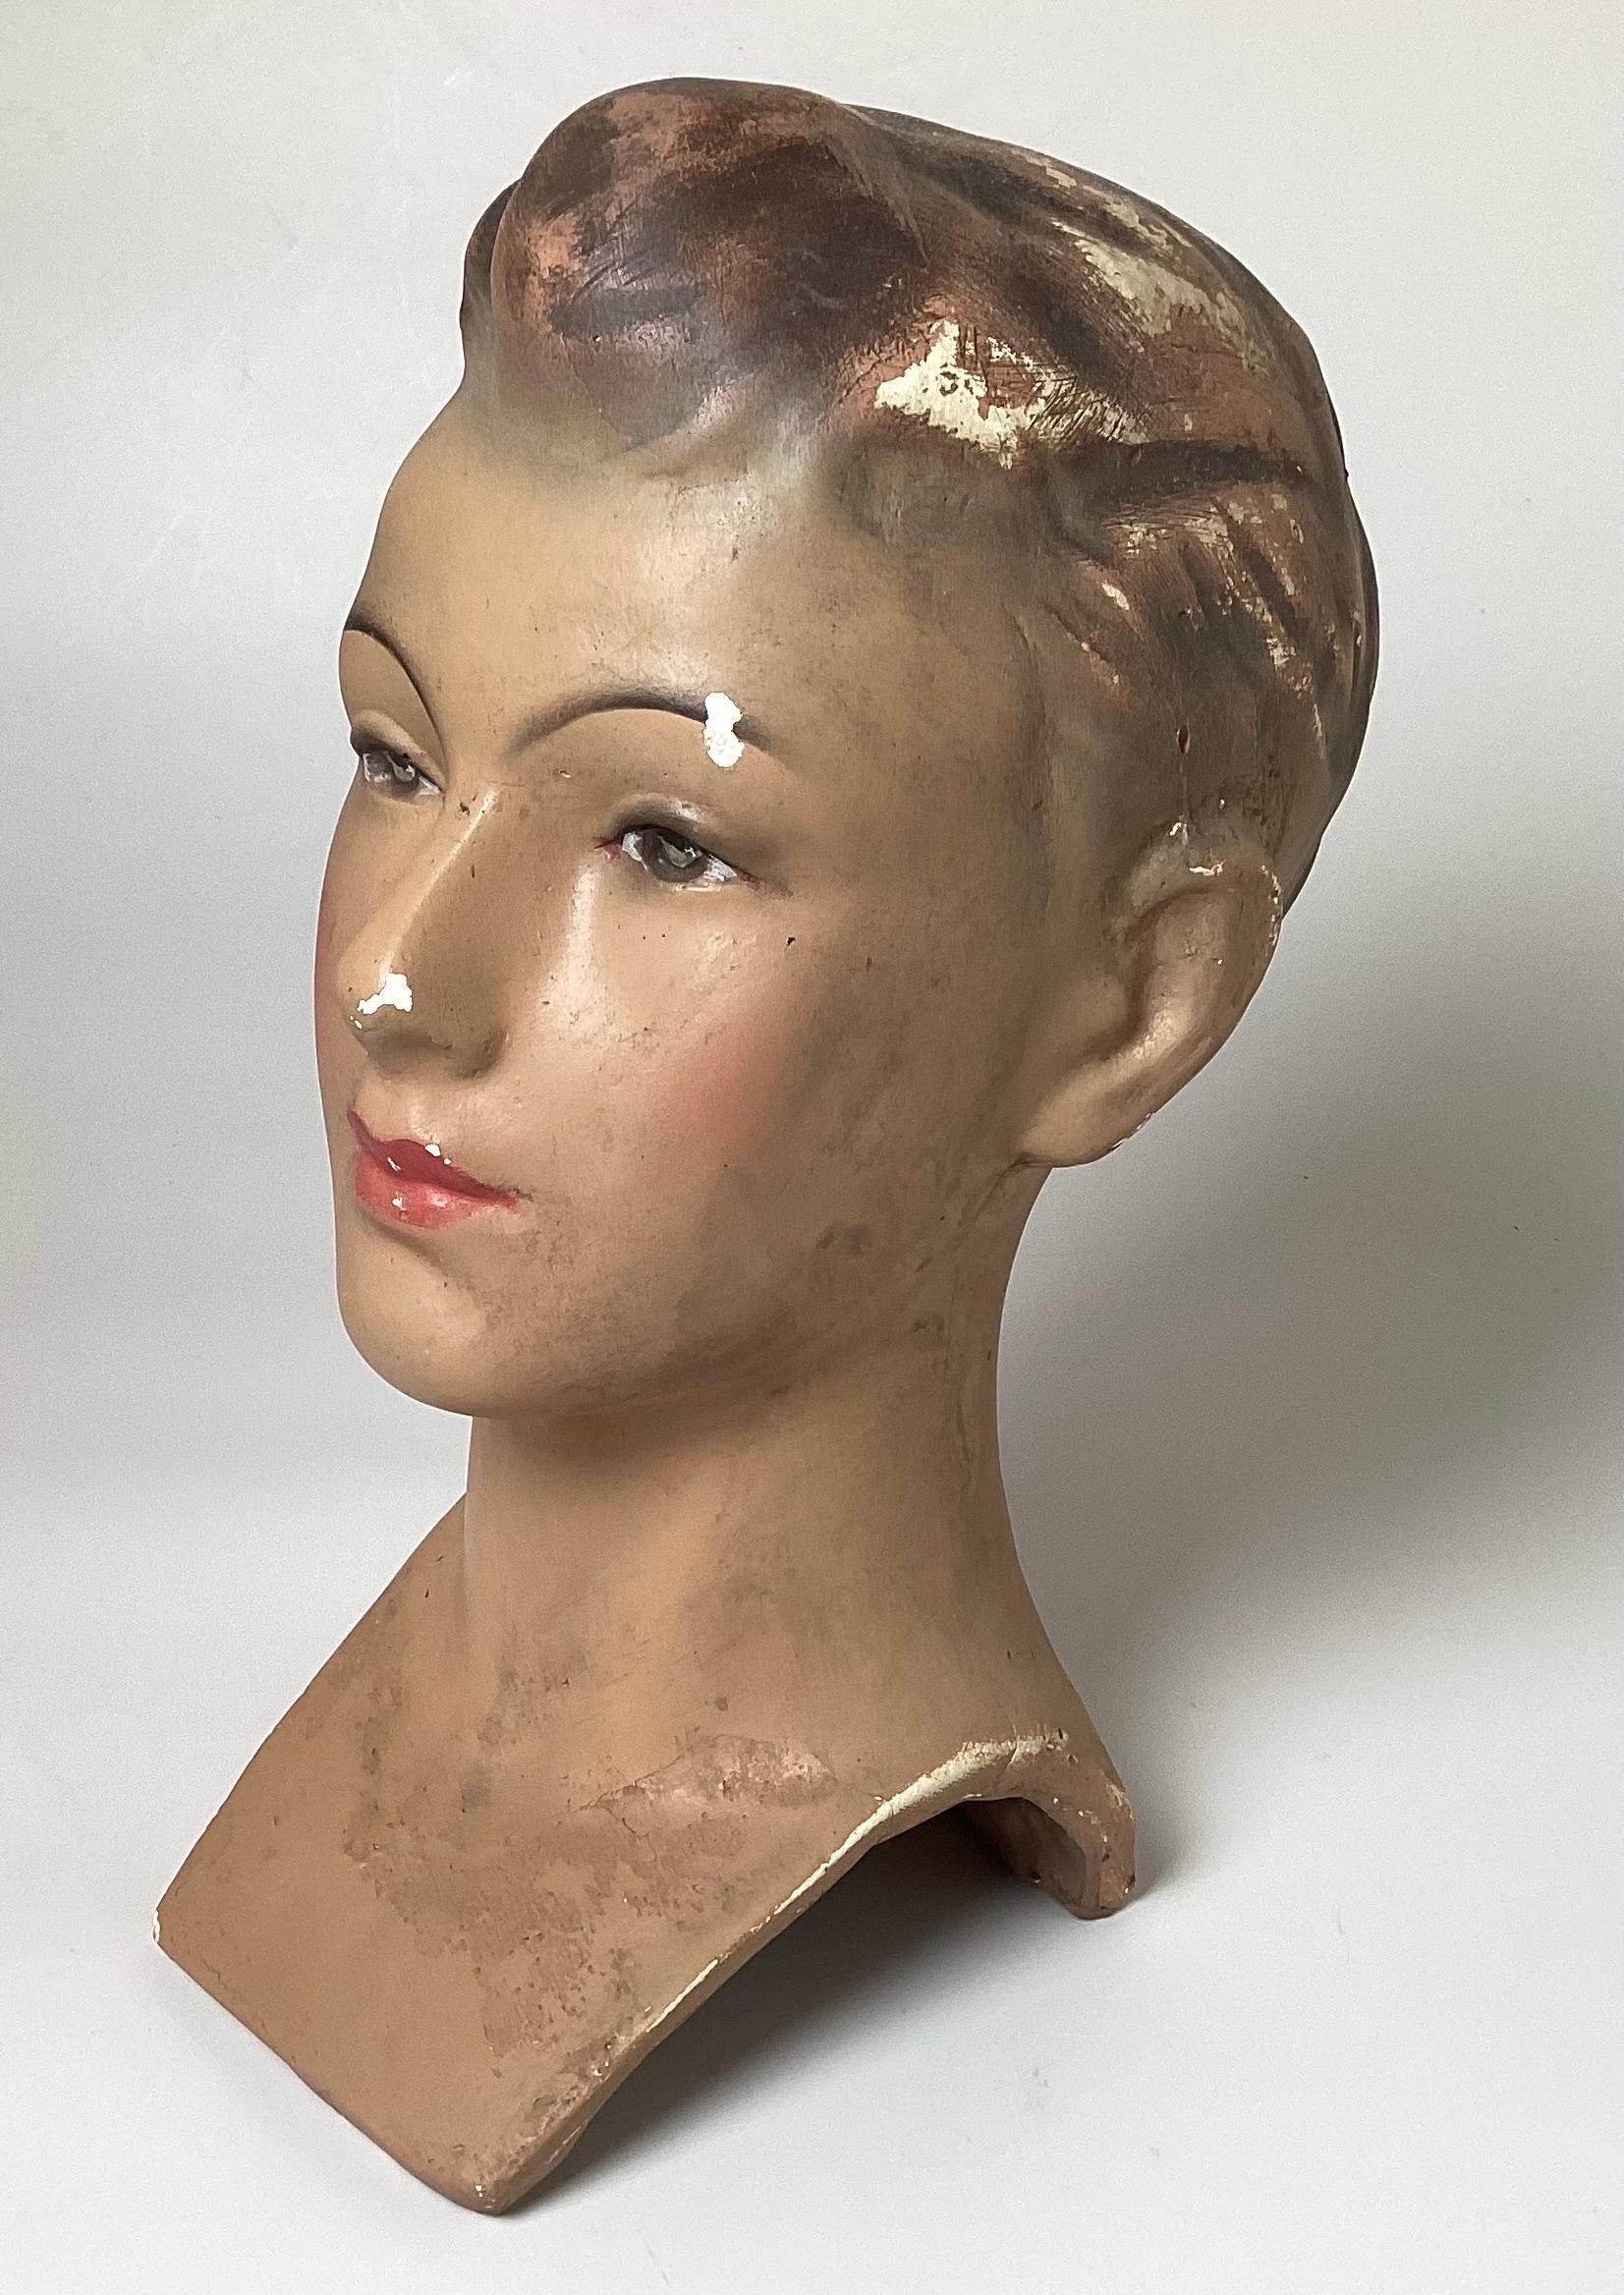 All original plaster mannequin head from a Belgium department store. The face of a teen aged young man with the original hand panted face and hair, made of a heavy plaster. Europe, 1940s 13 inches tall.